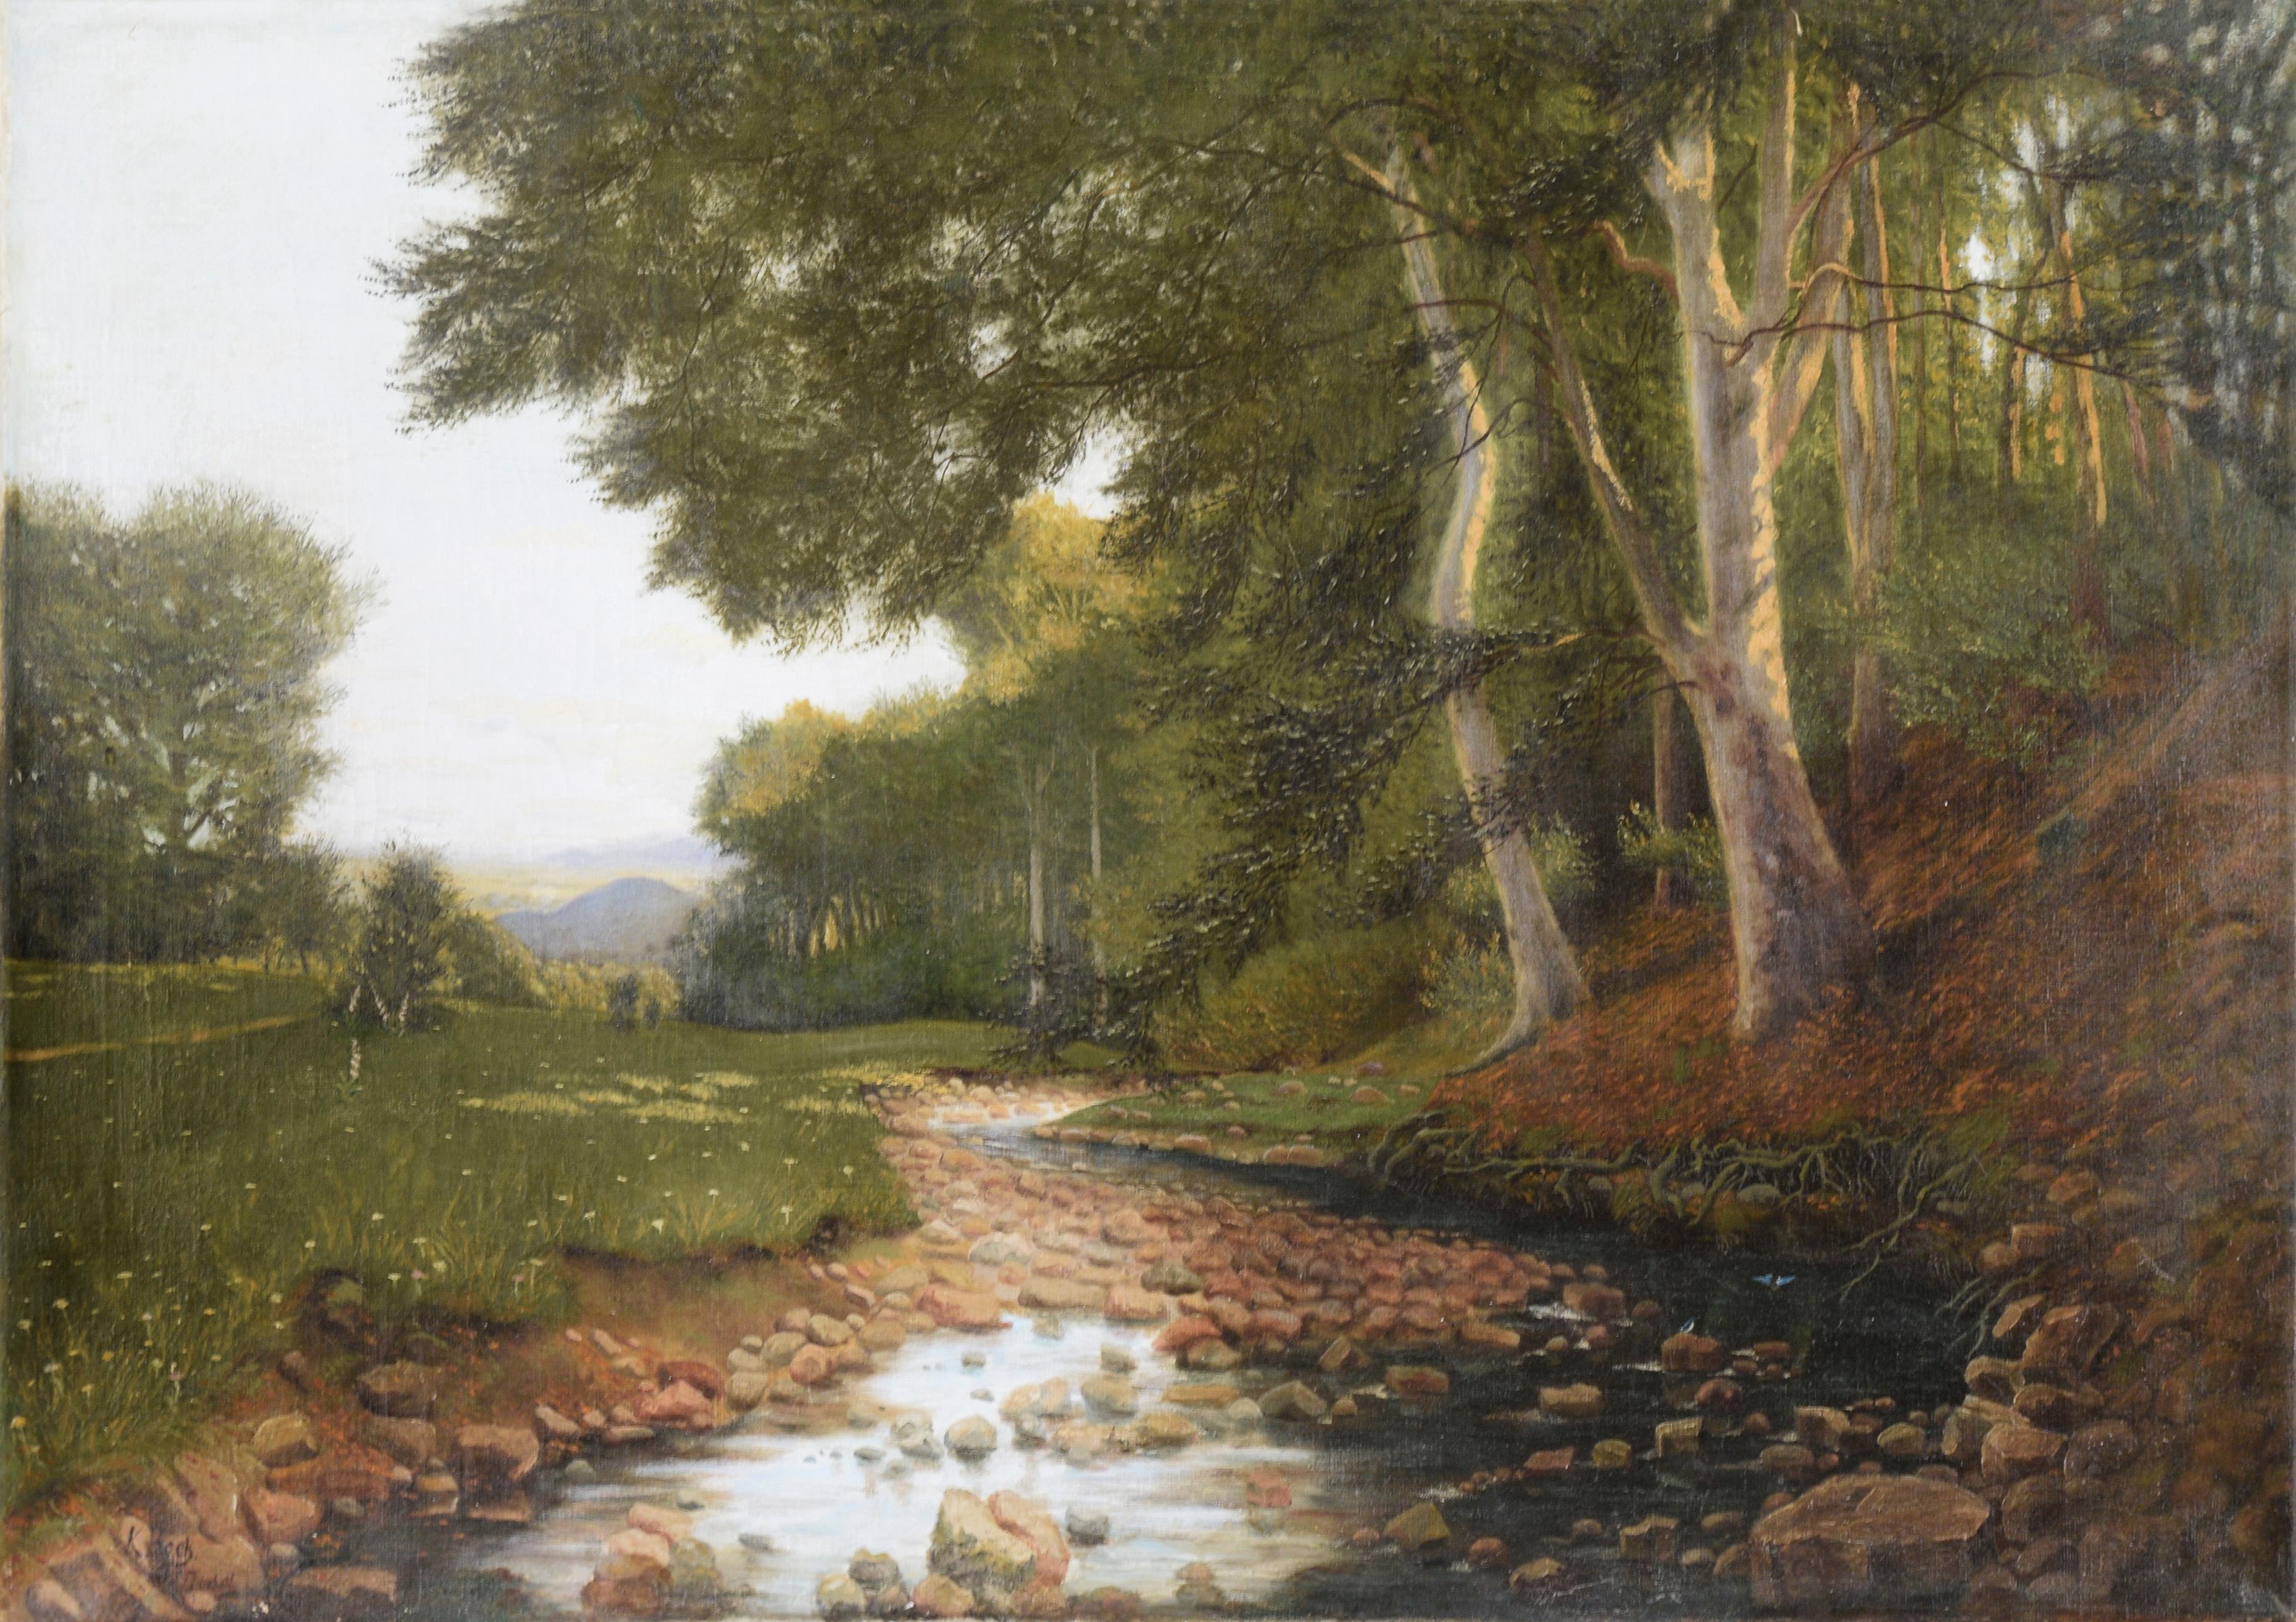 Karl bock Landscape Painting - Stream at the Edge of the Forest - Landscape